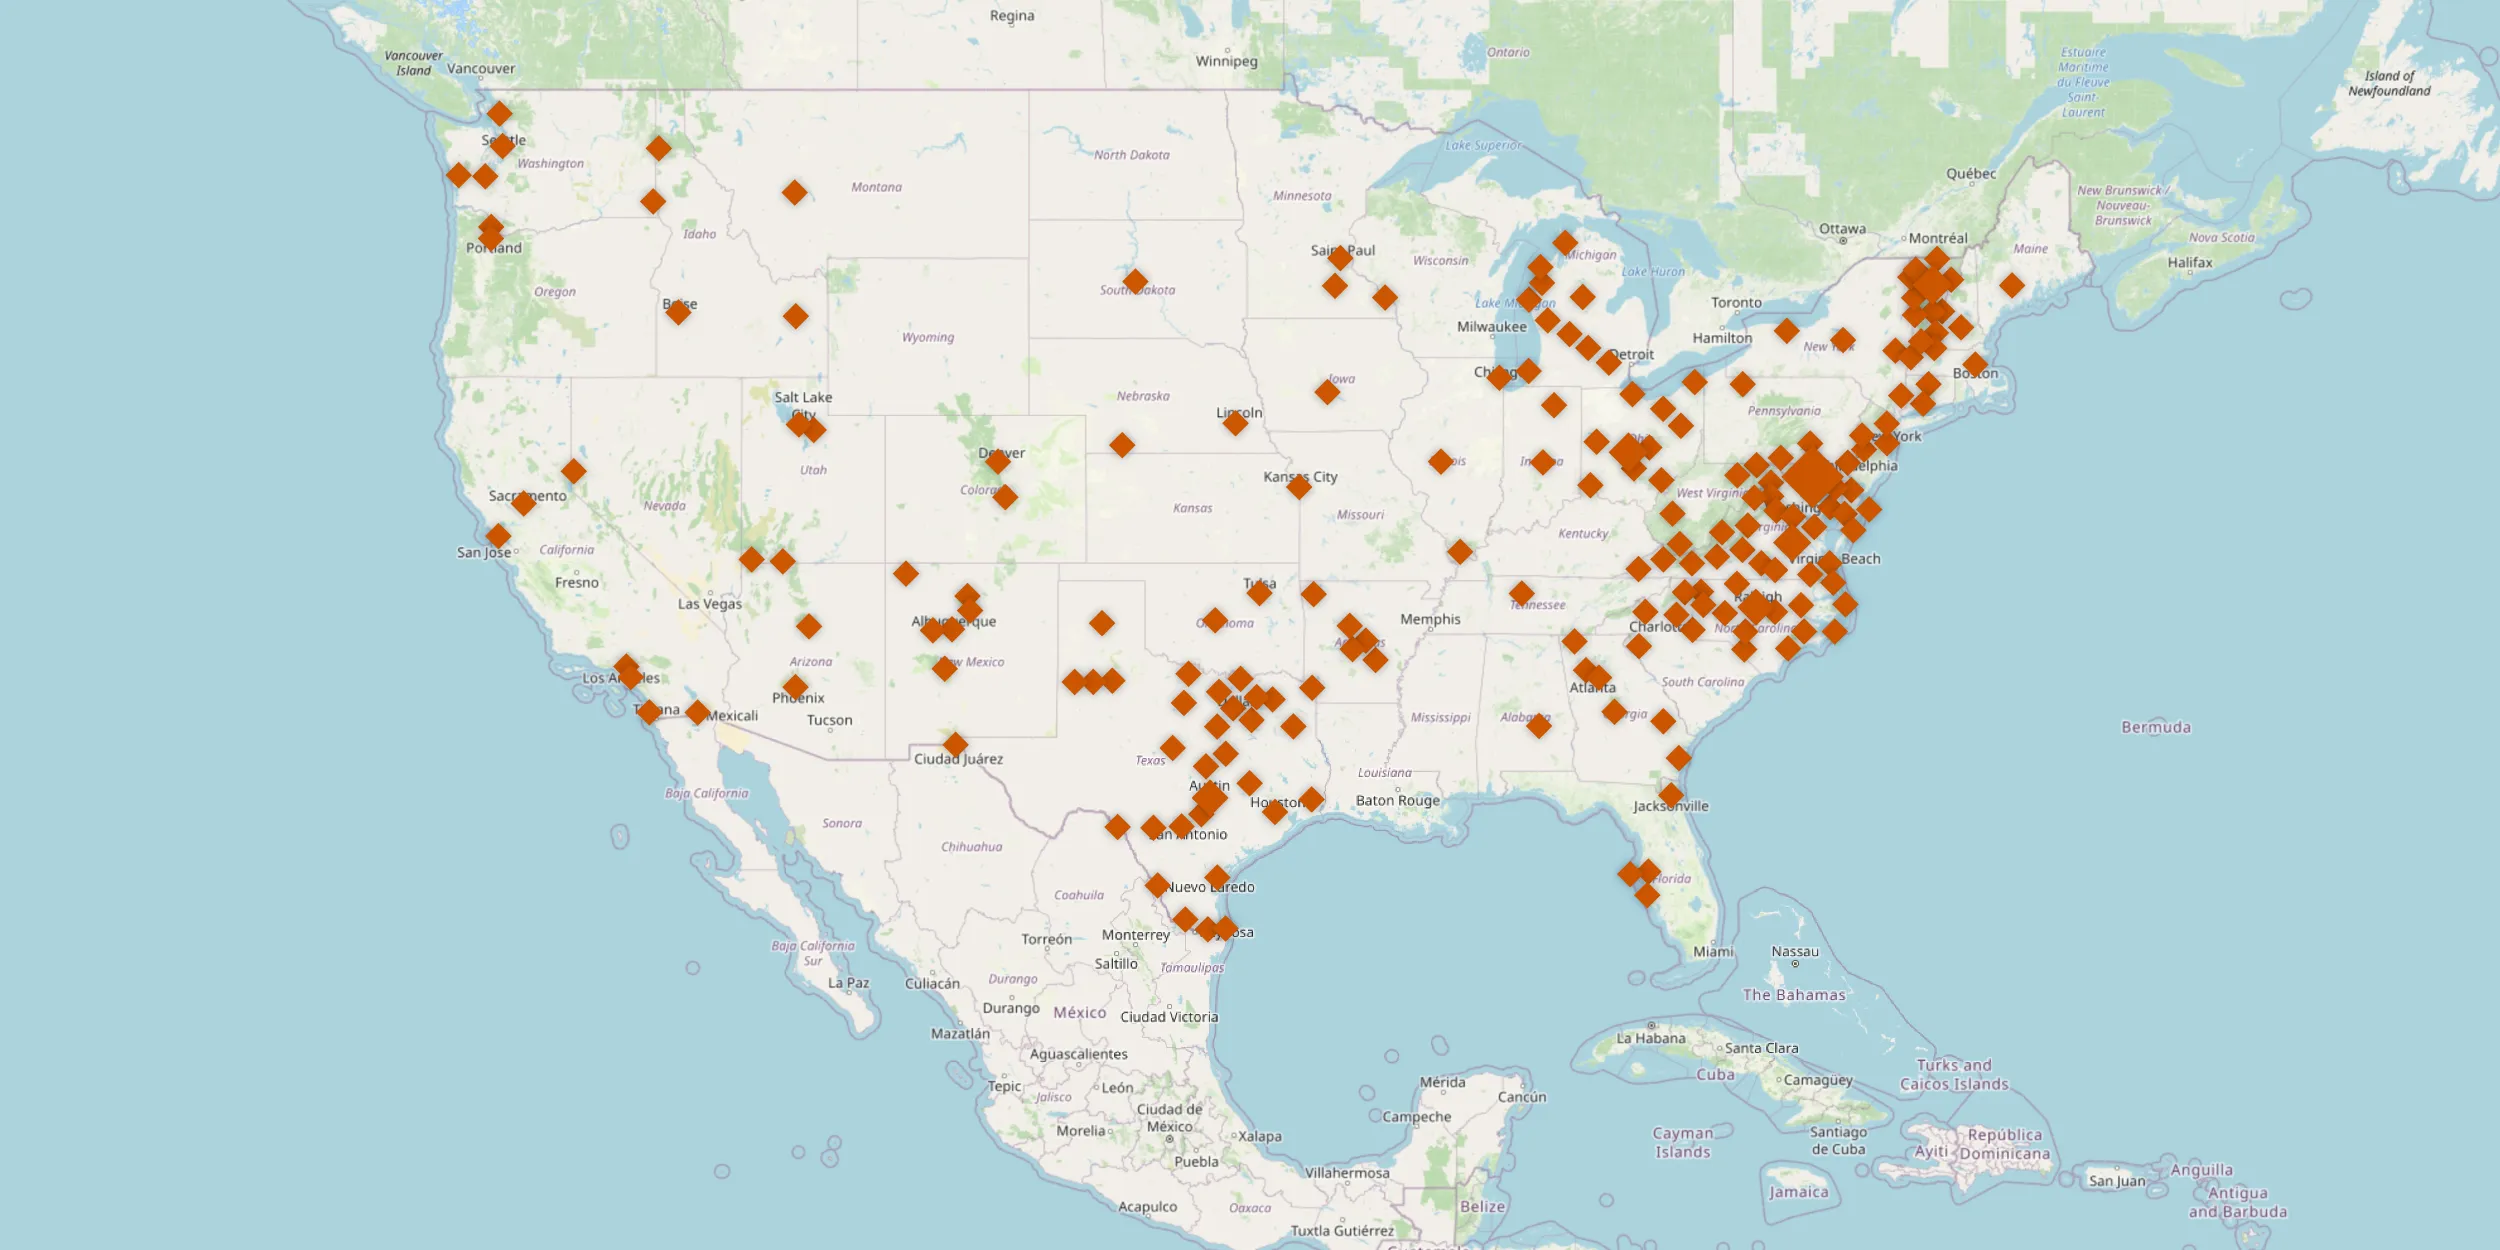 A map of the United States with many dots, marking the locations where KFH has completed projects. The dots range across the nation, in almost every state, concentrated the most on the east coast, midwest, and southwest.